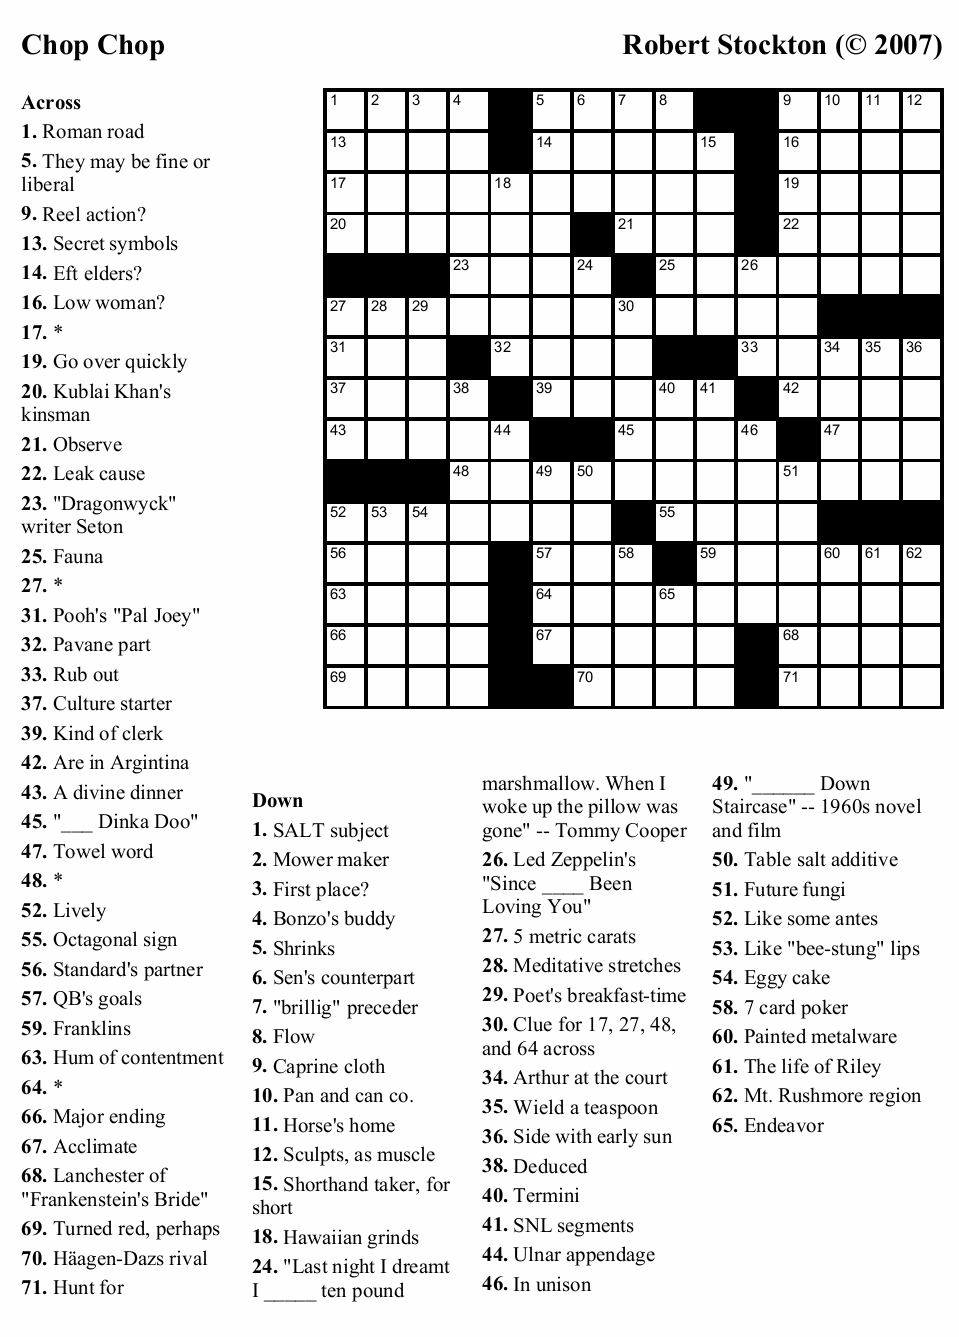 Printable Crossword For 7 Year Old